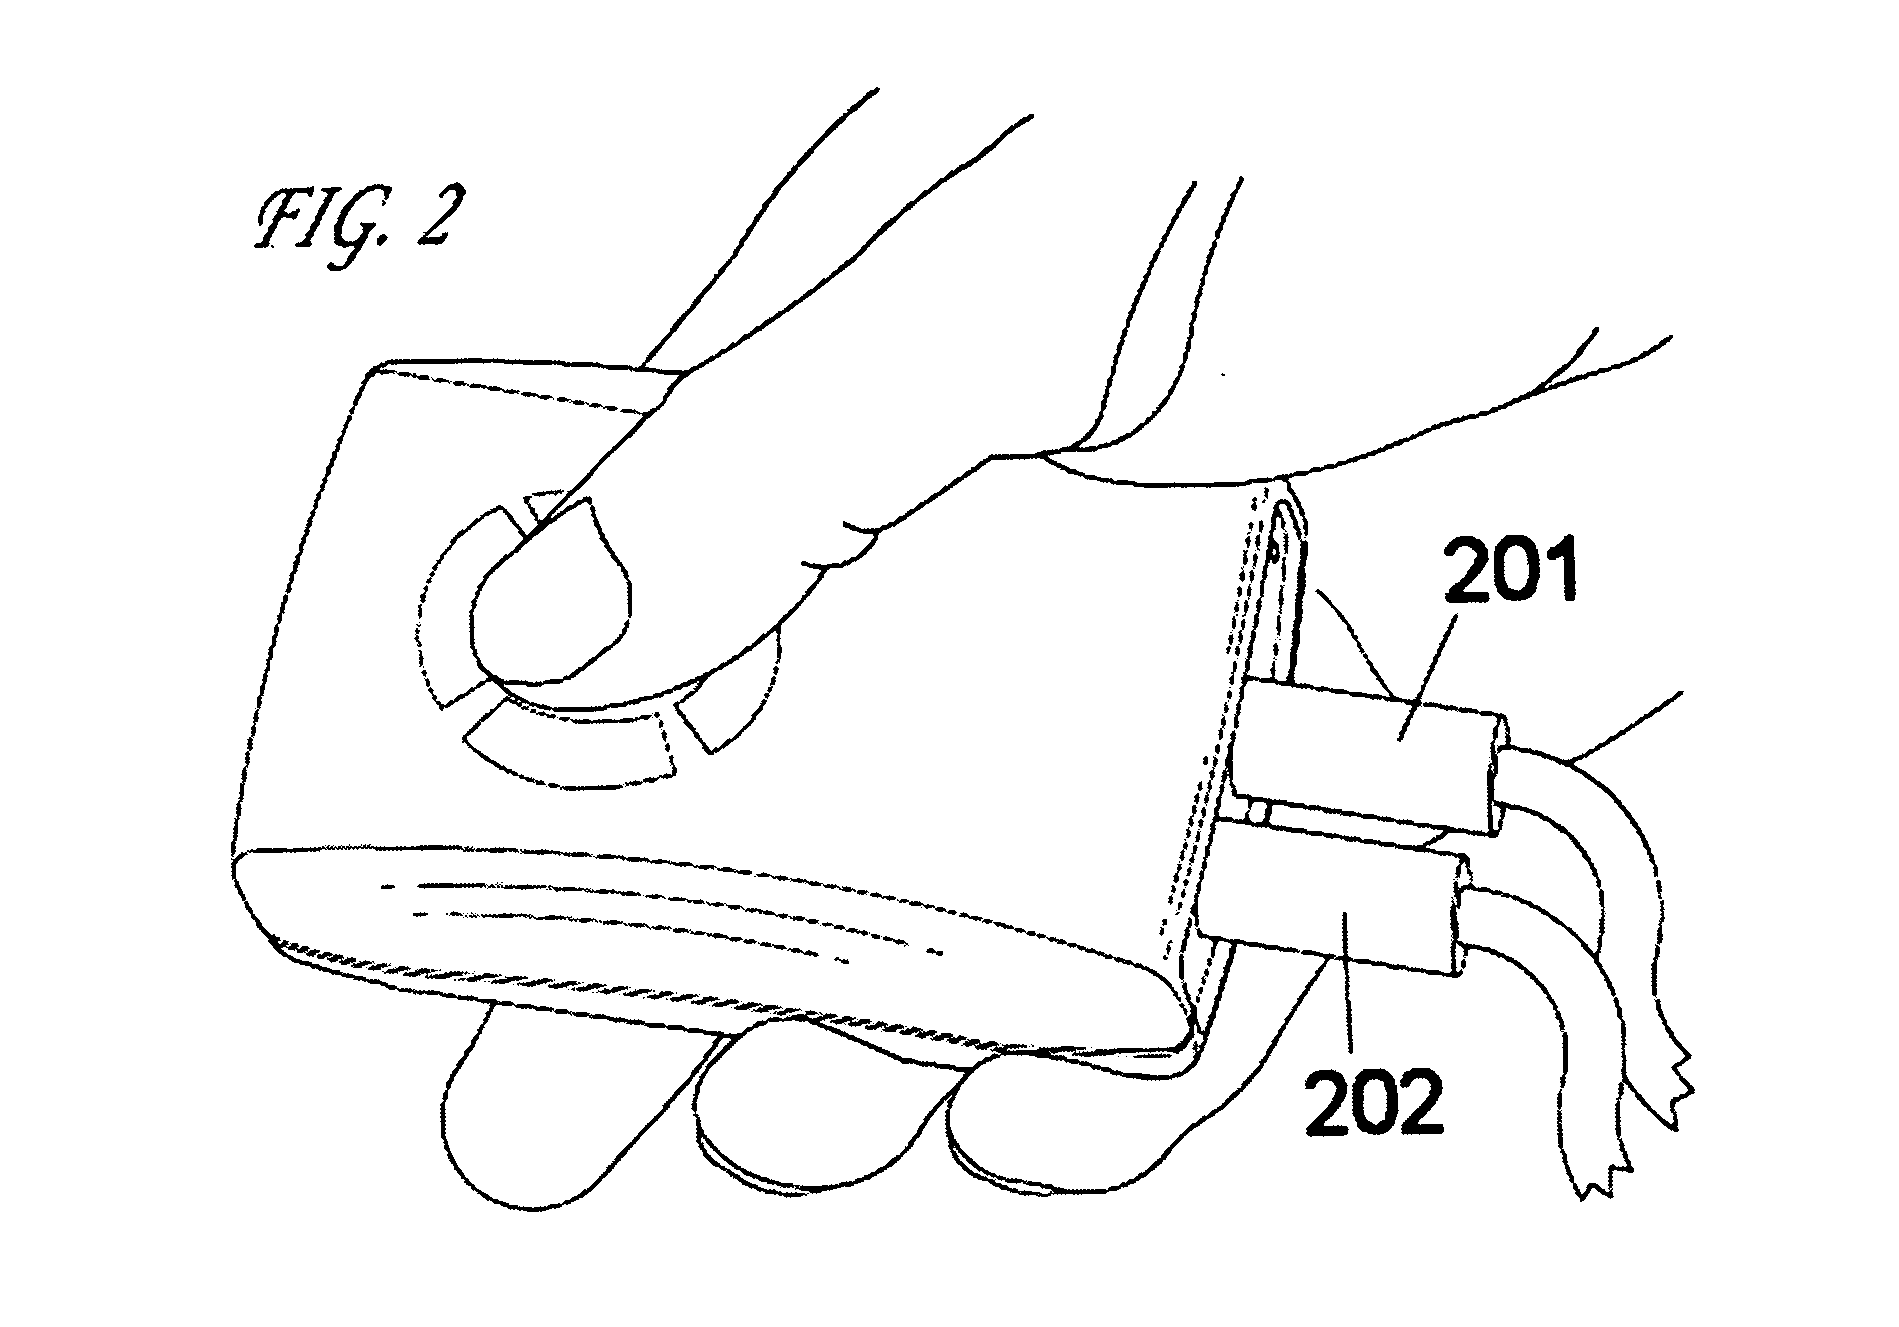 Portable audiometer enclosed within a patient response mechanism housing